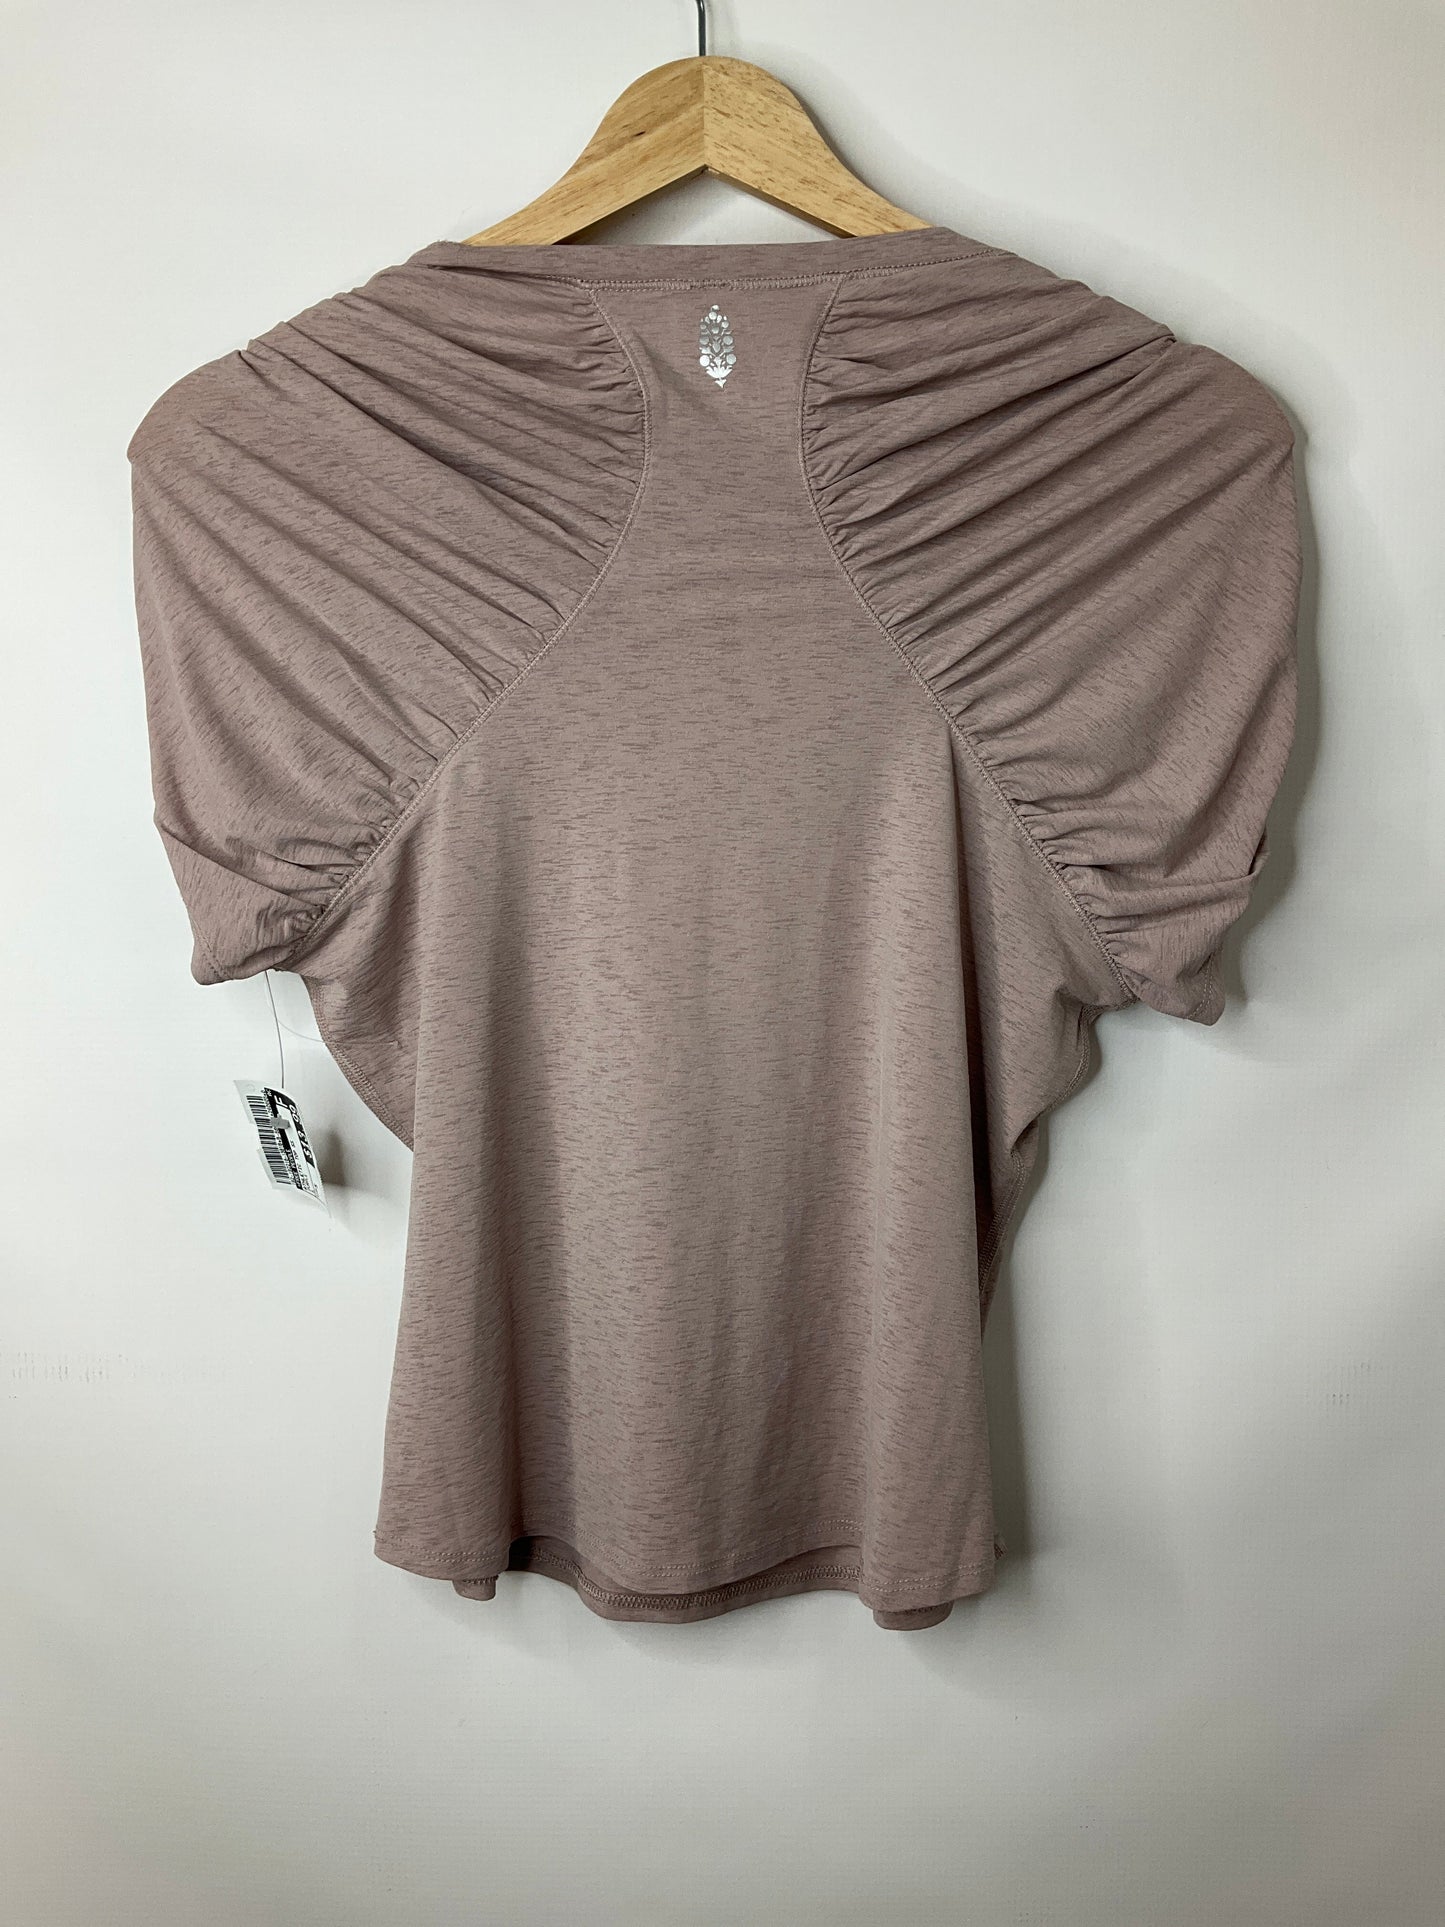 Purple Athletic Top Short Sleeve Free People, Size S